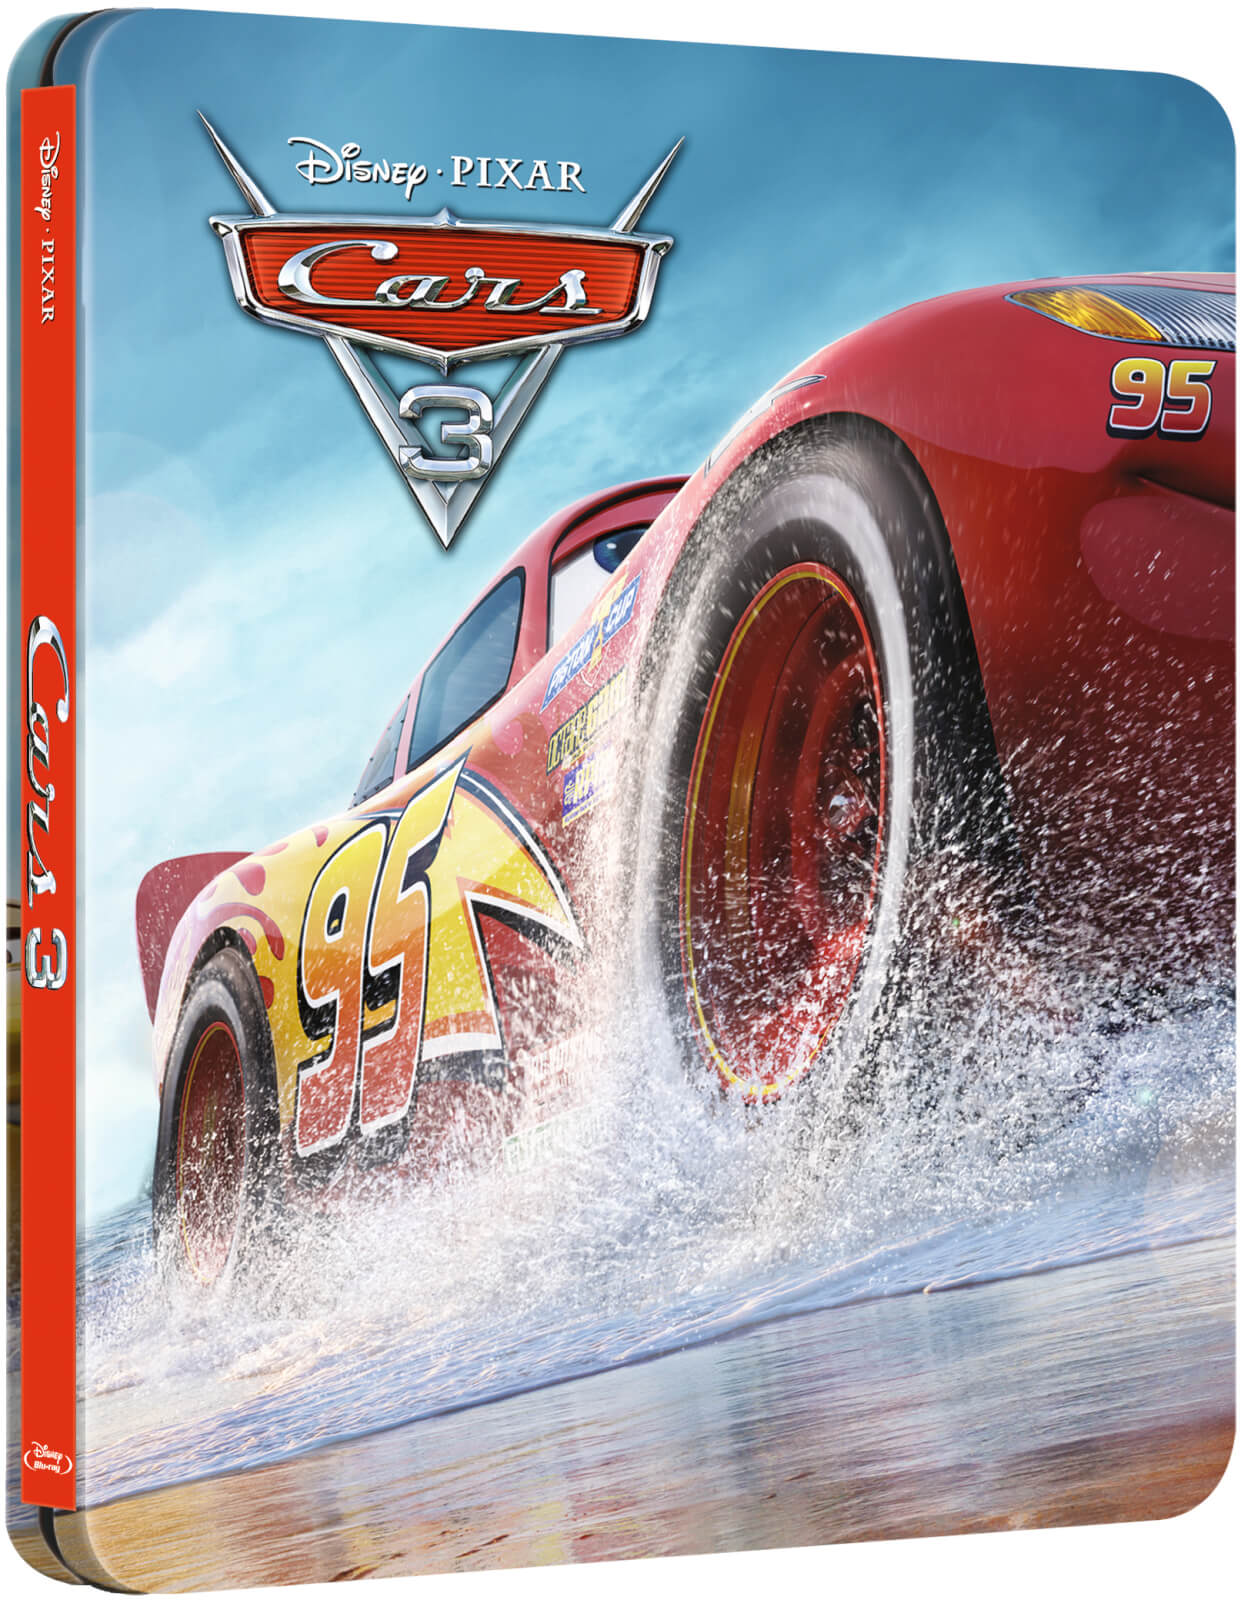 Cars 3 3D (Includes 2D Version) - Zavvi Exclusive Limited Edition Steelbook